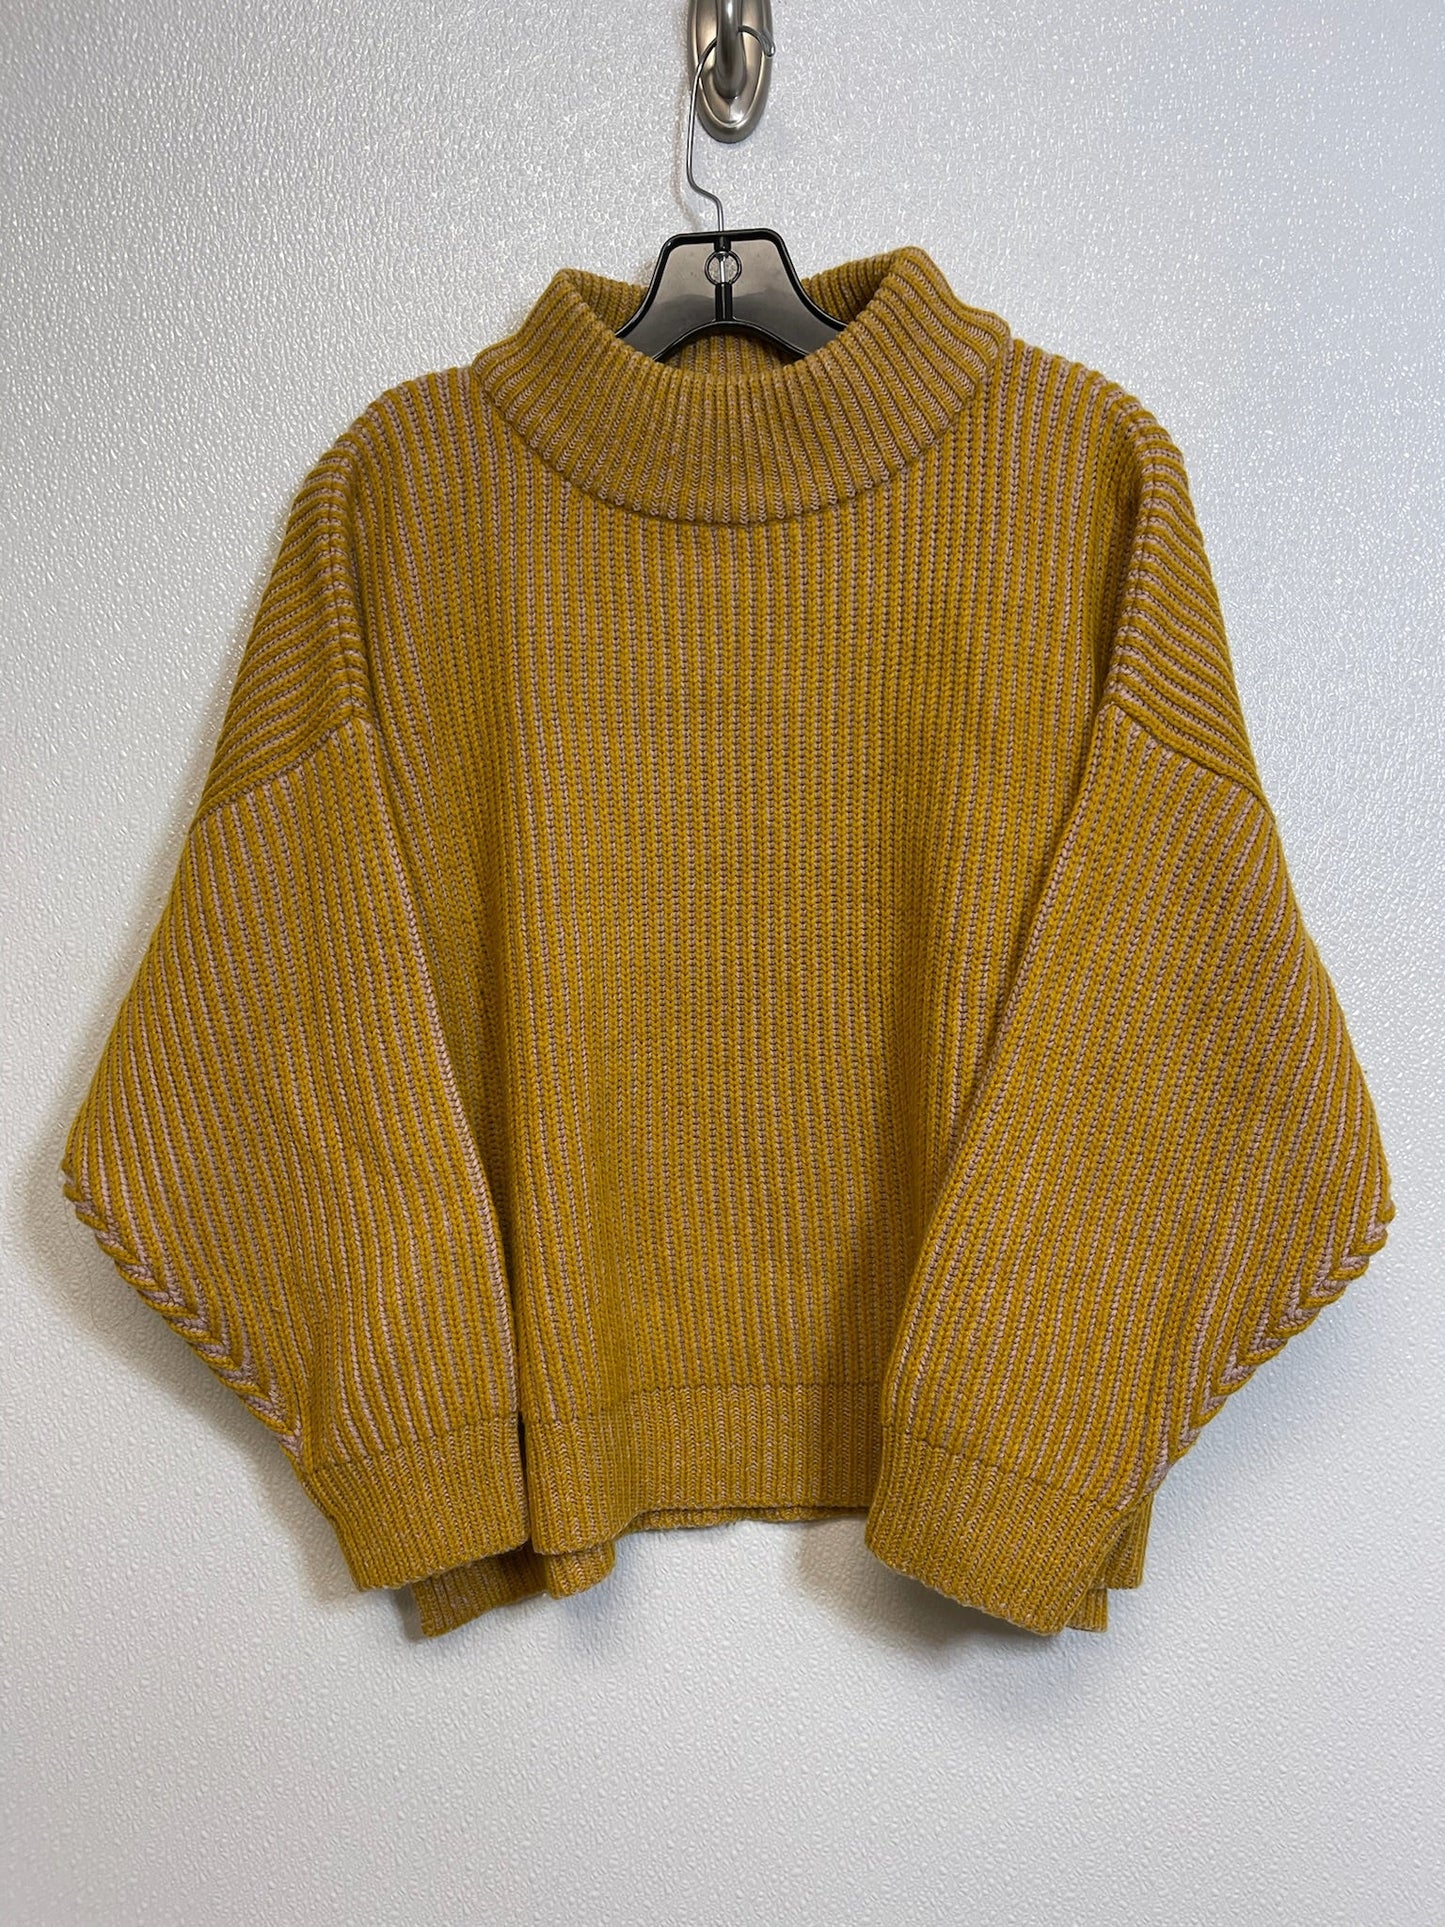 Mustard Sweater Top Shop, Size S